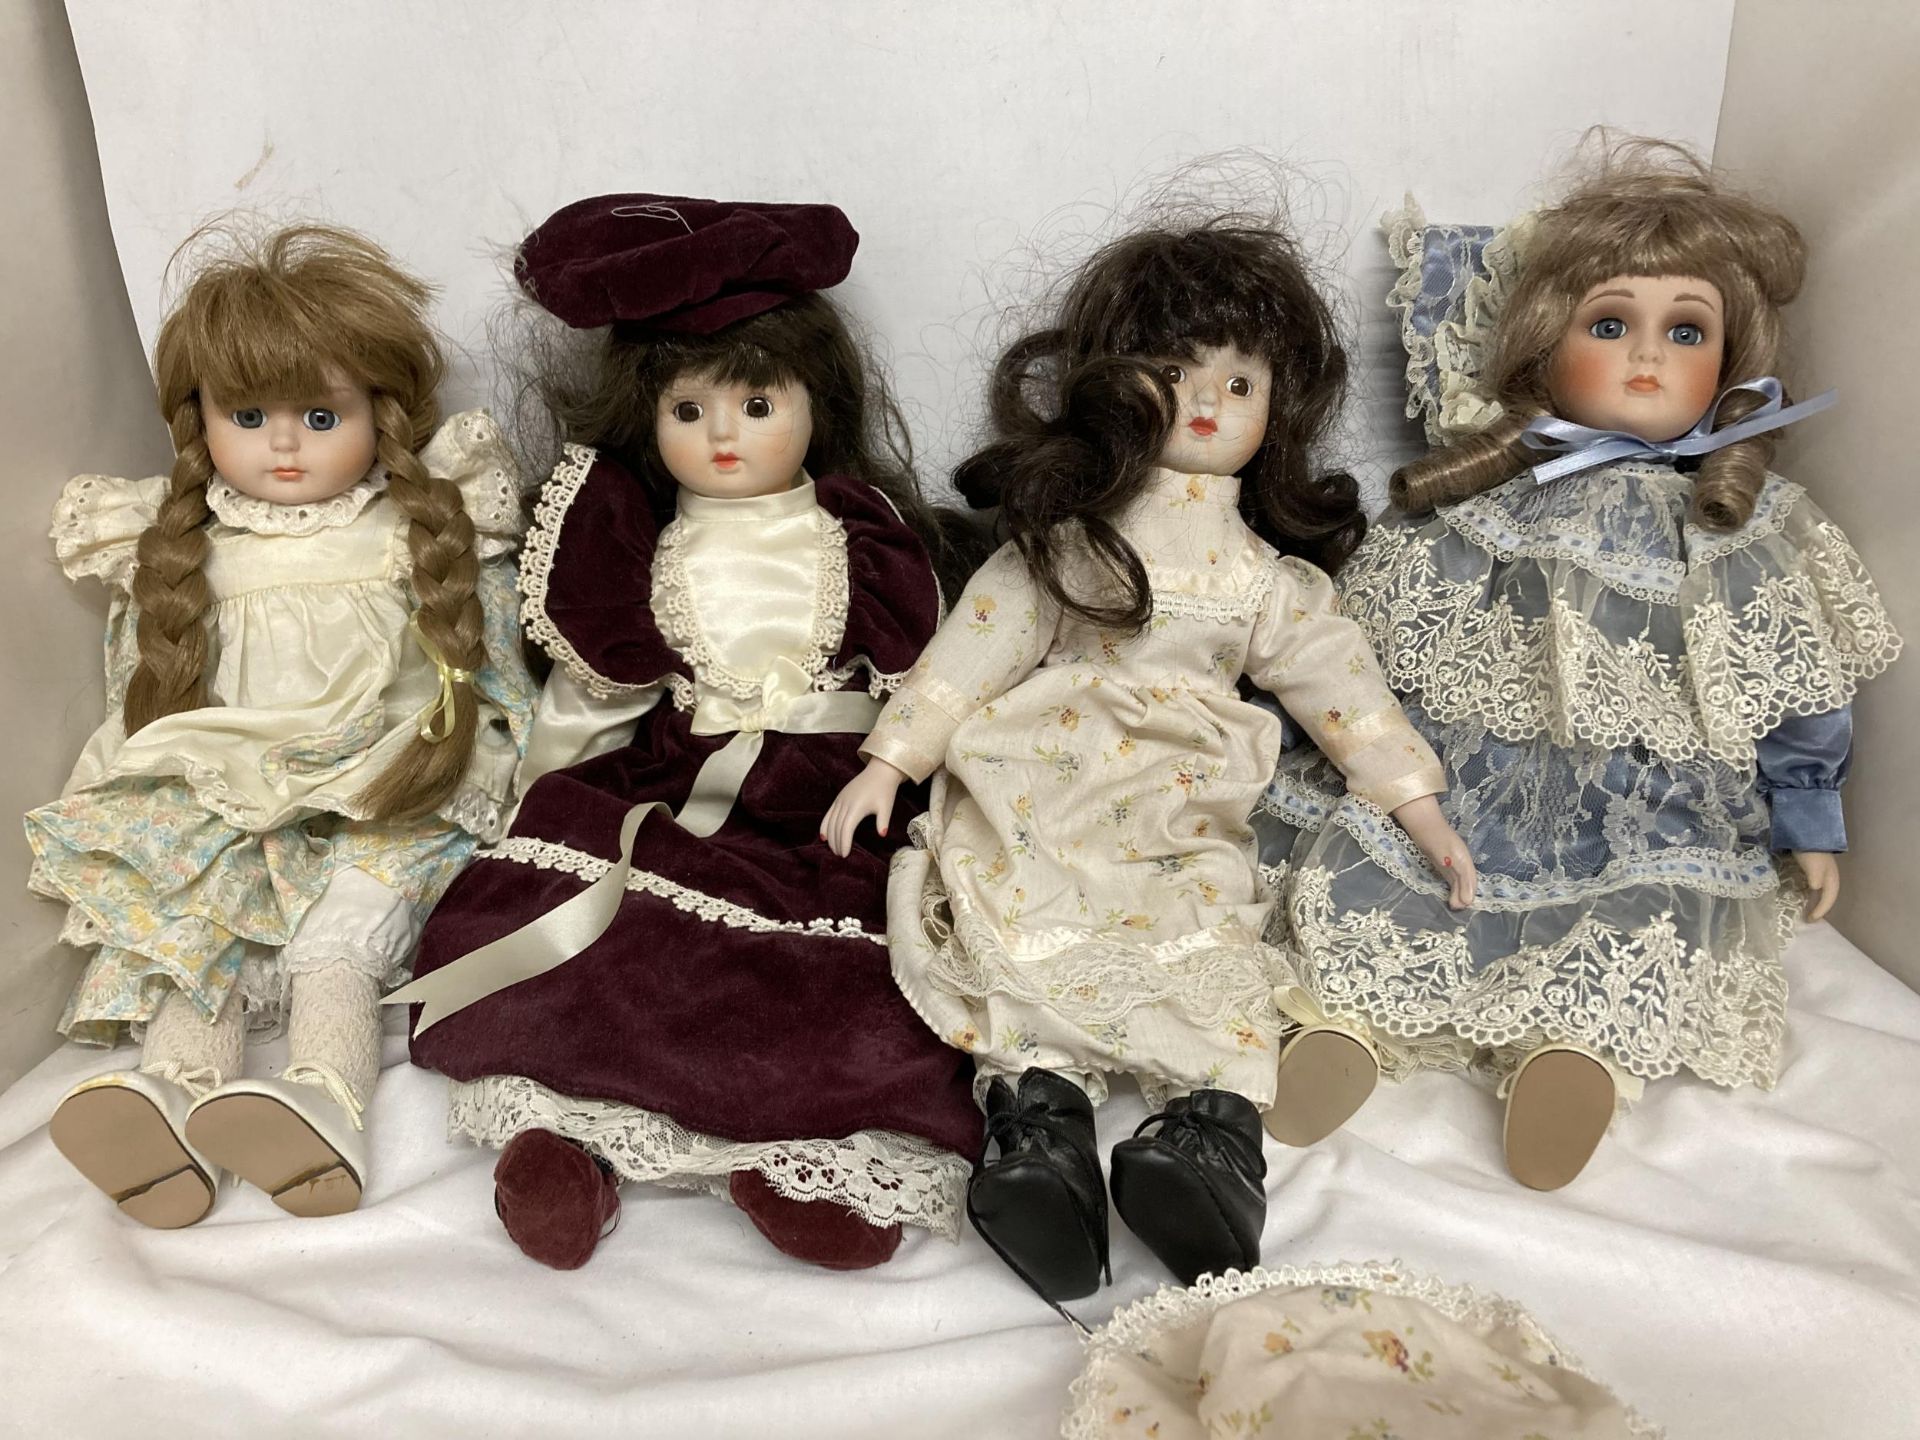 A COLLECTION OF PORCELAIN HEADED DOLLS IN COSTUMES - 7 IN TOTAL - Image 2 of 2